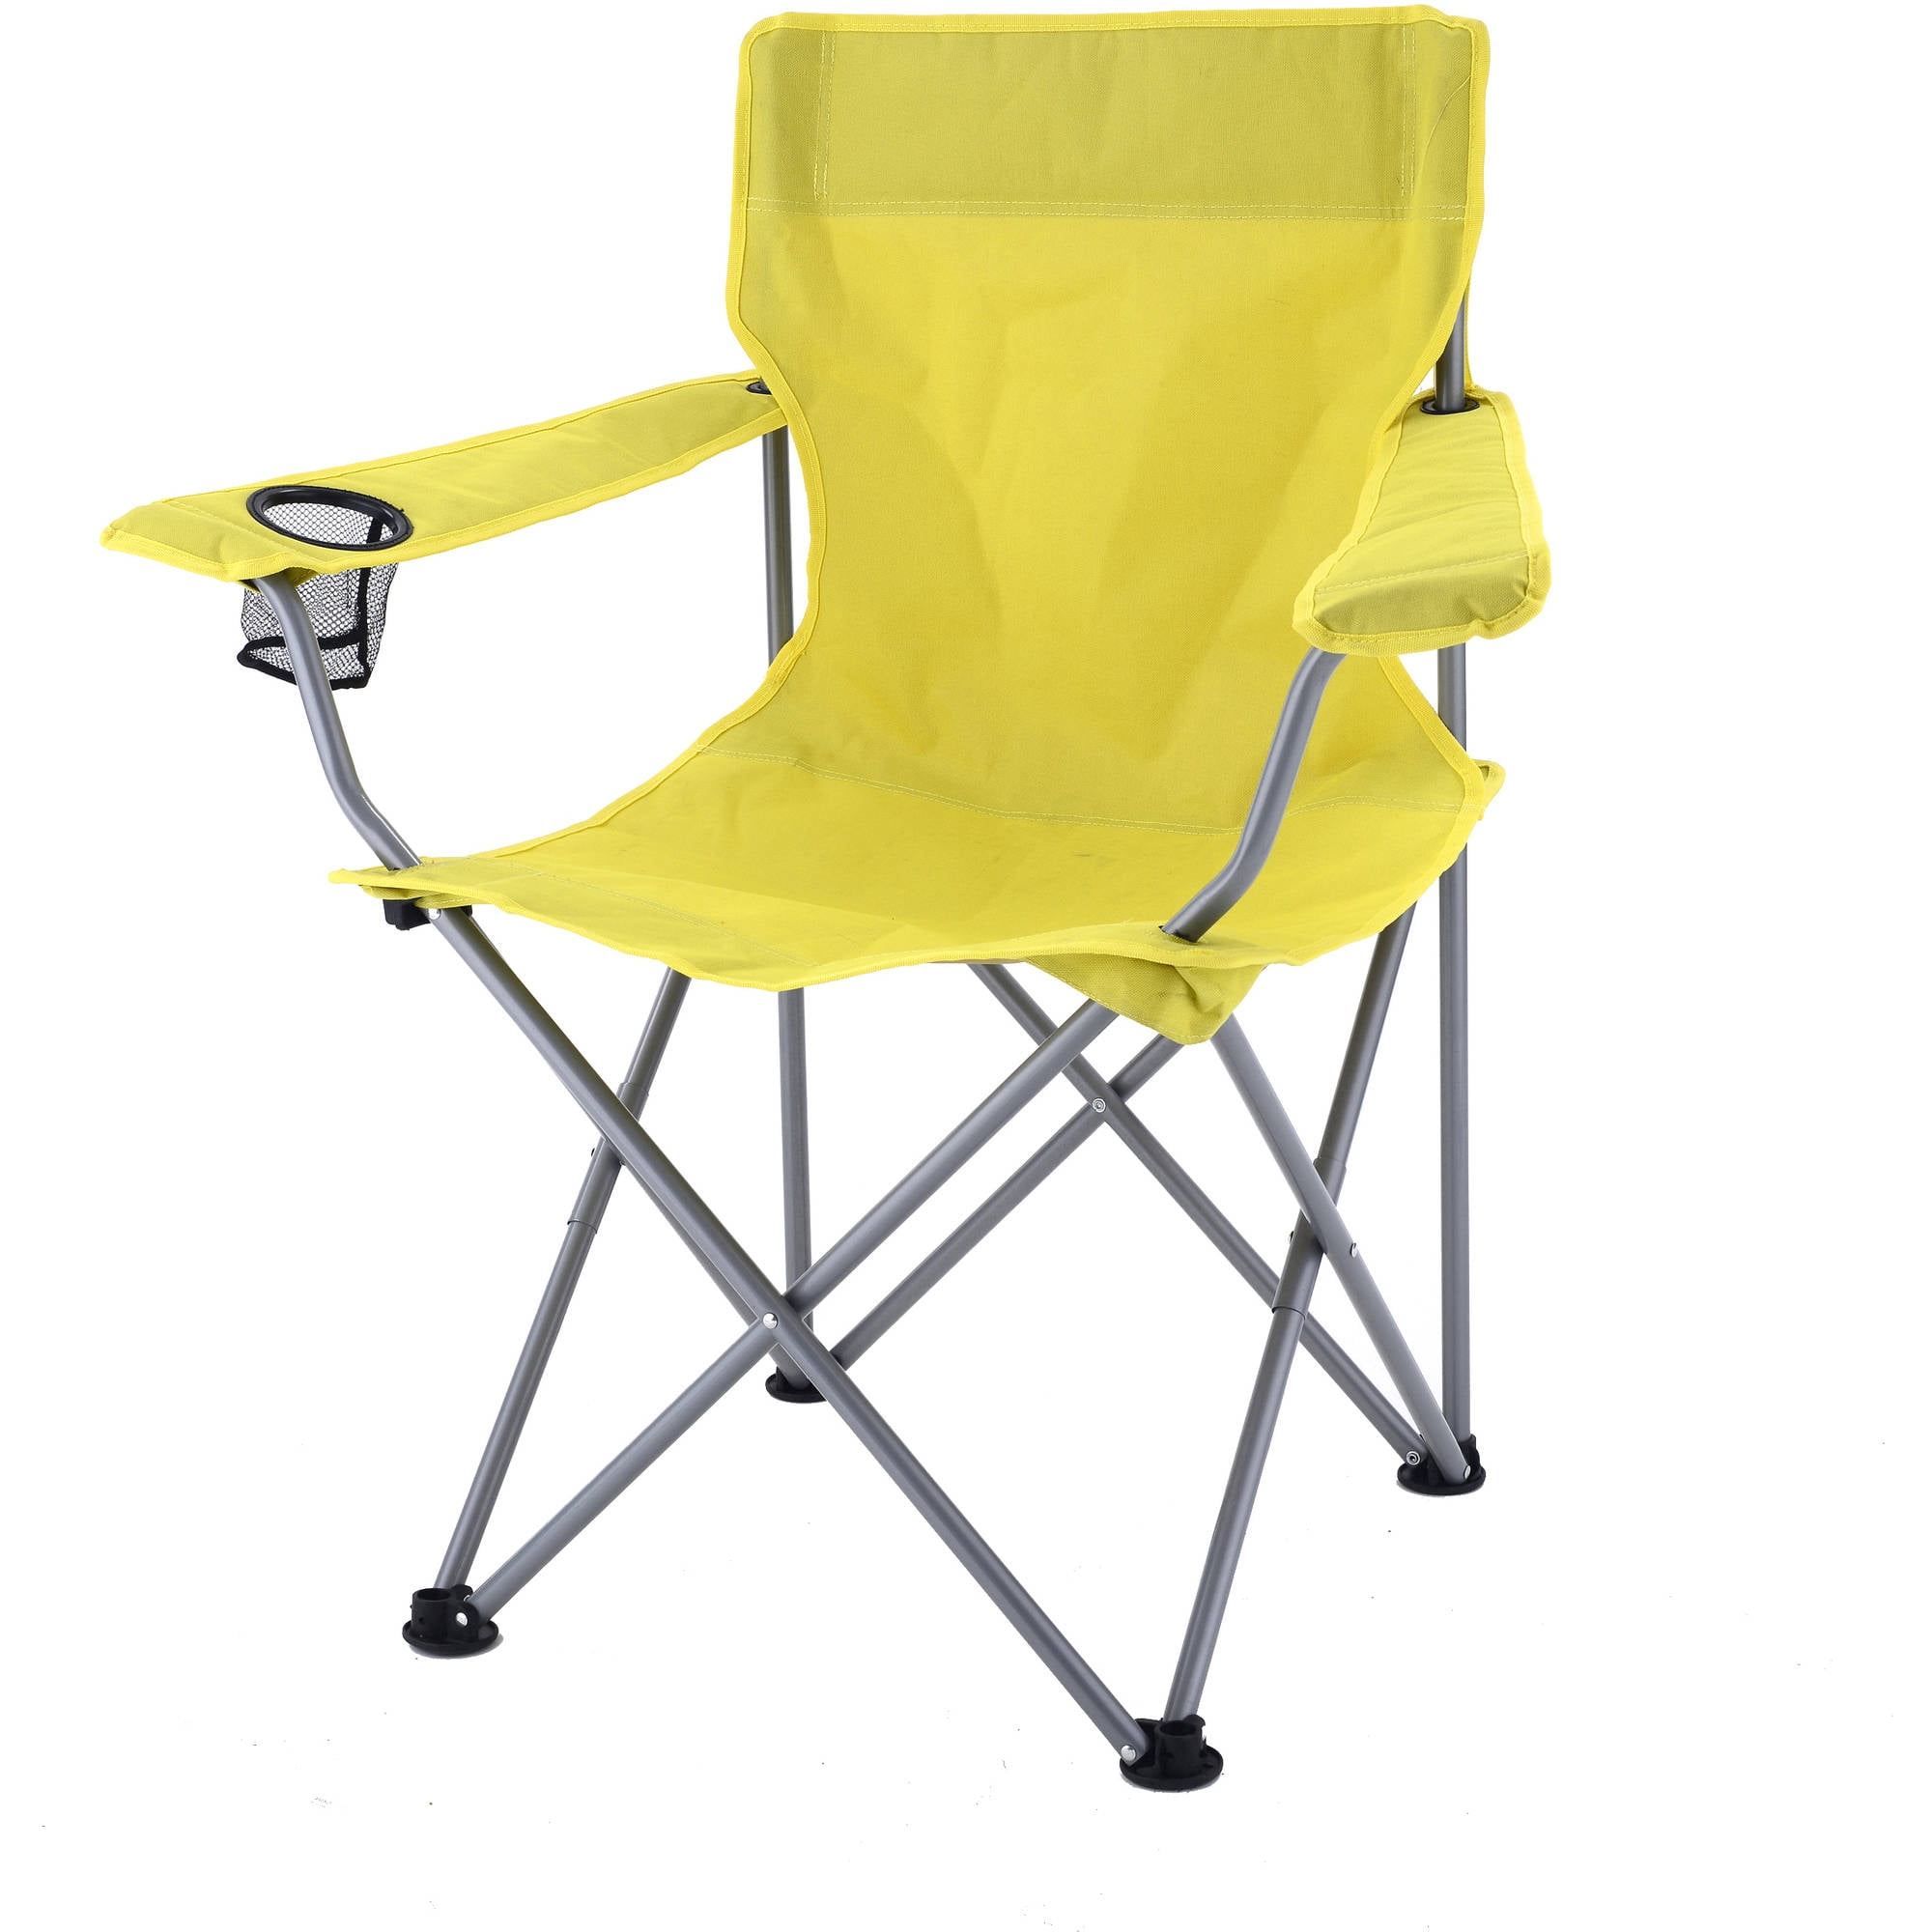 Yellow Folding Chair,Folding Stool Indoor Portable Chair Camping Garden Party